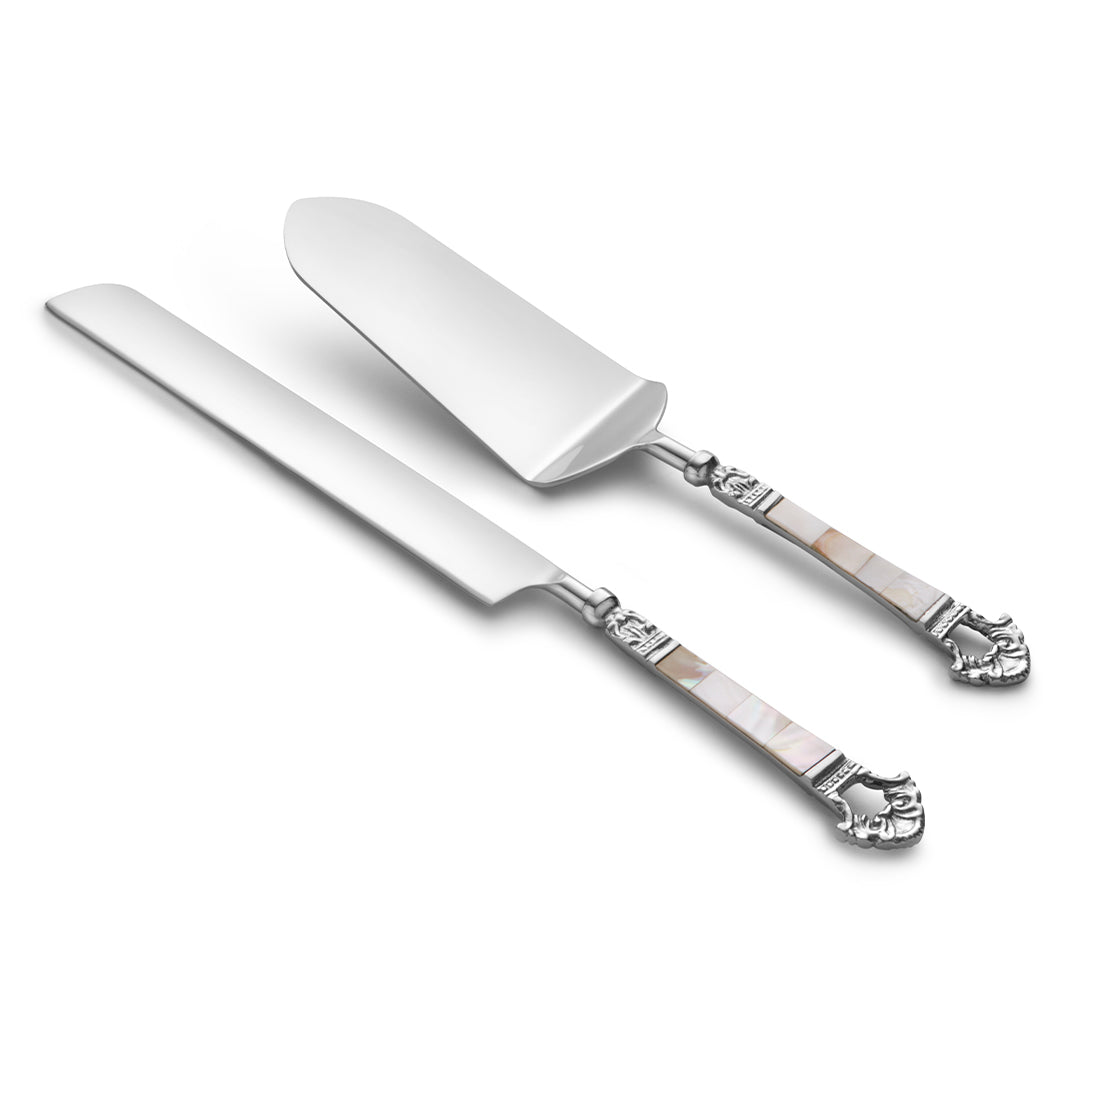 Stainless Steel Luxurious Mother of Pearl Silver Cake Server and Knife Set of 2 Perfect for Weddings Engagements Parties Birthdays and Events Lift and Cut Pie Cake Pizza